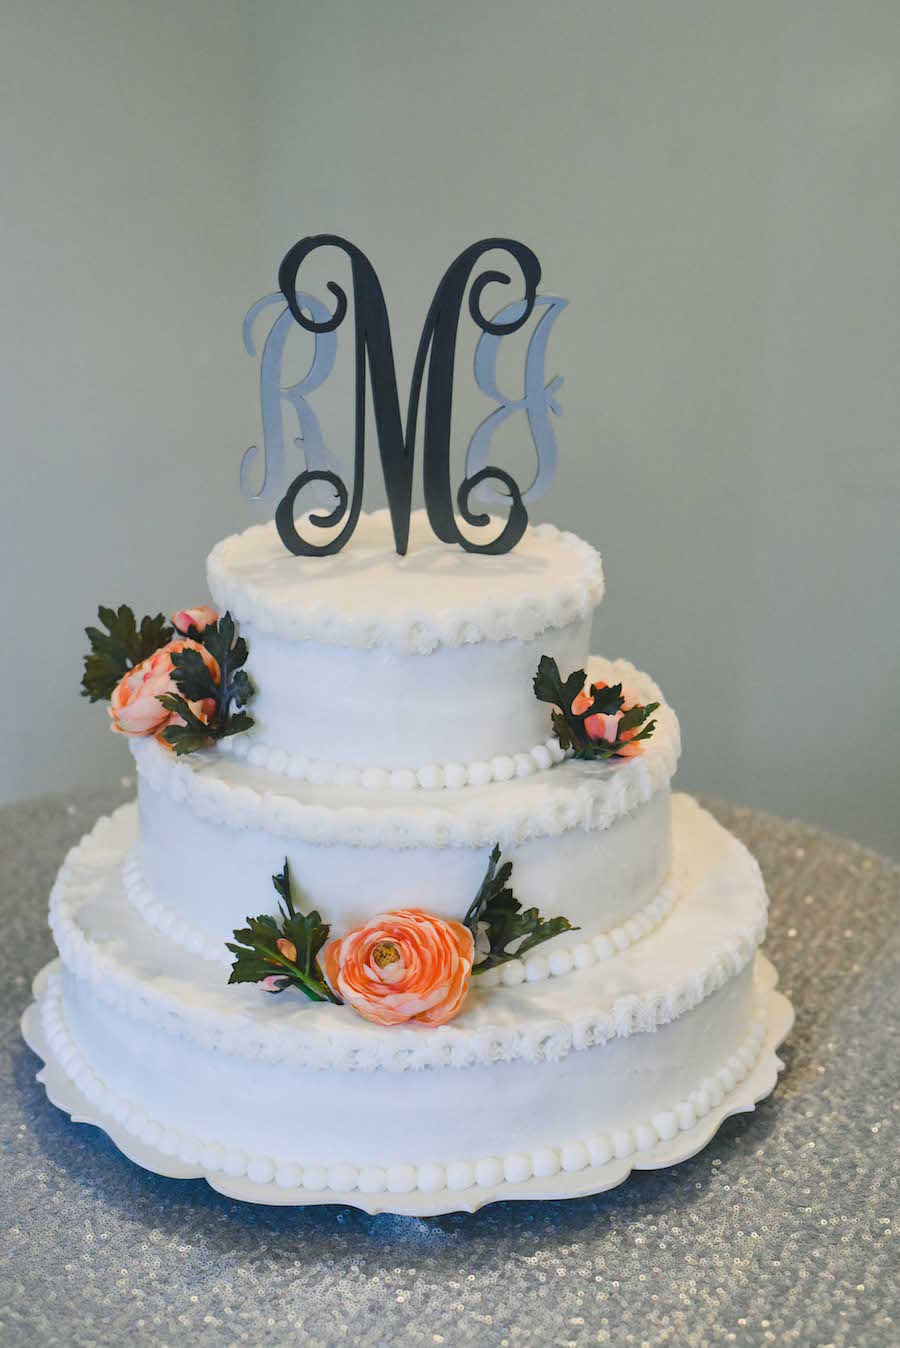 Three Tier Round White Wedding Cake with Coral Roses and Pearl Trim with Monogram Cake Topper on Sequined Specialty Linen